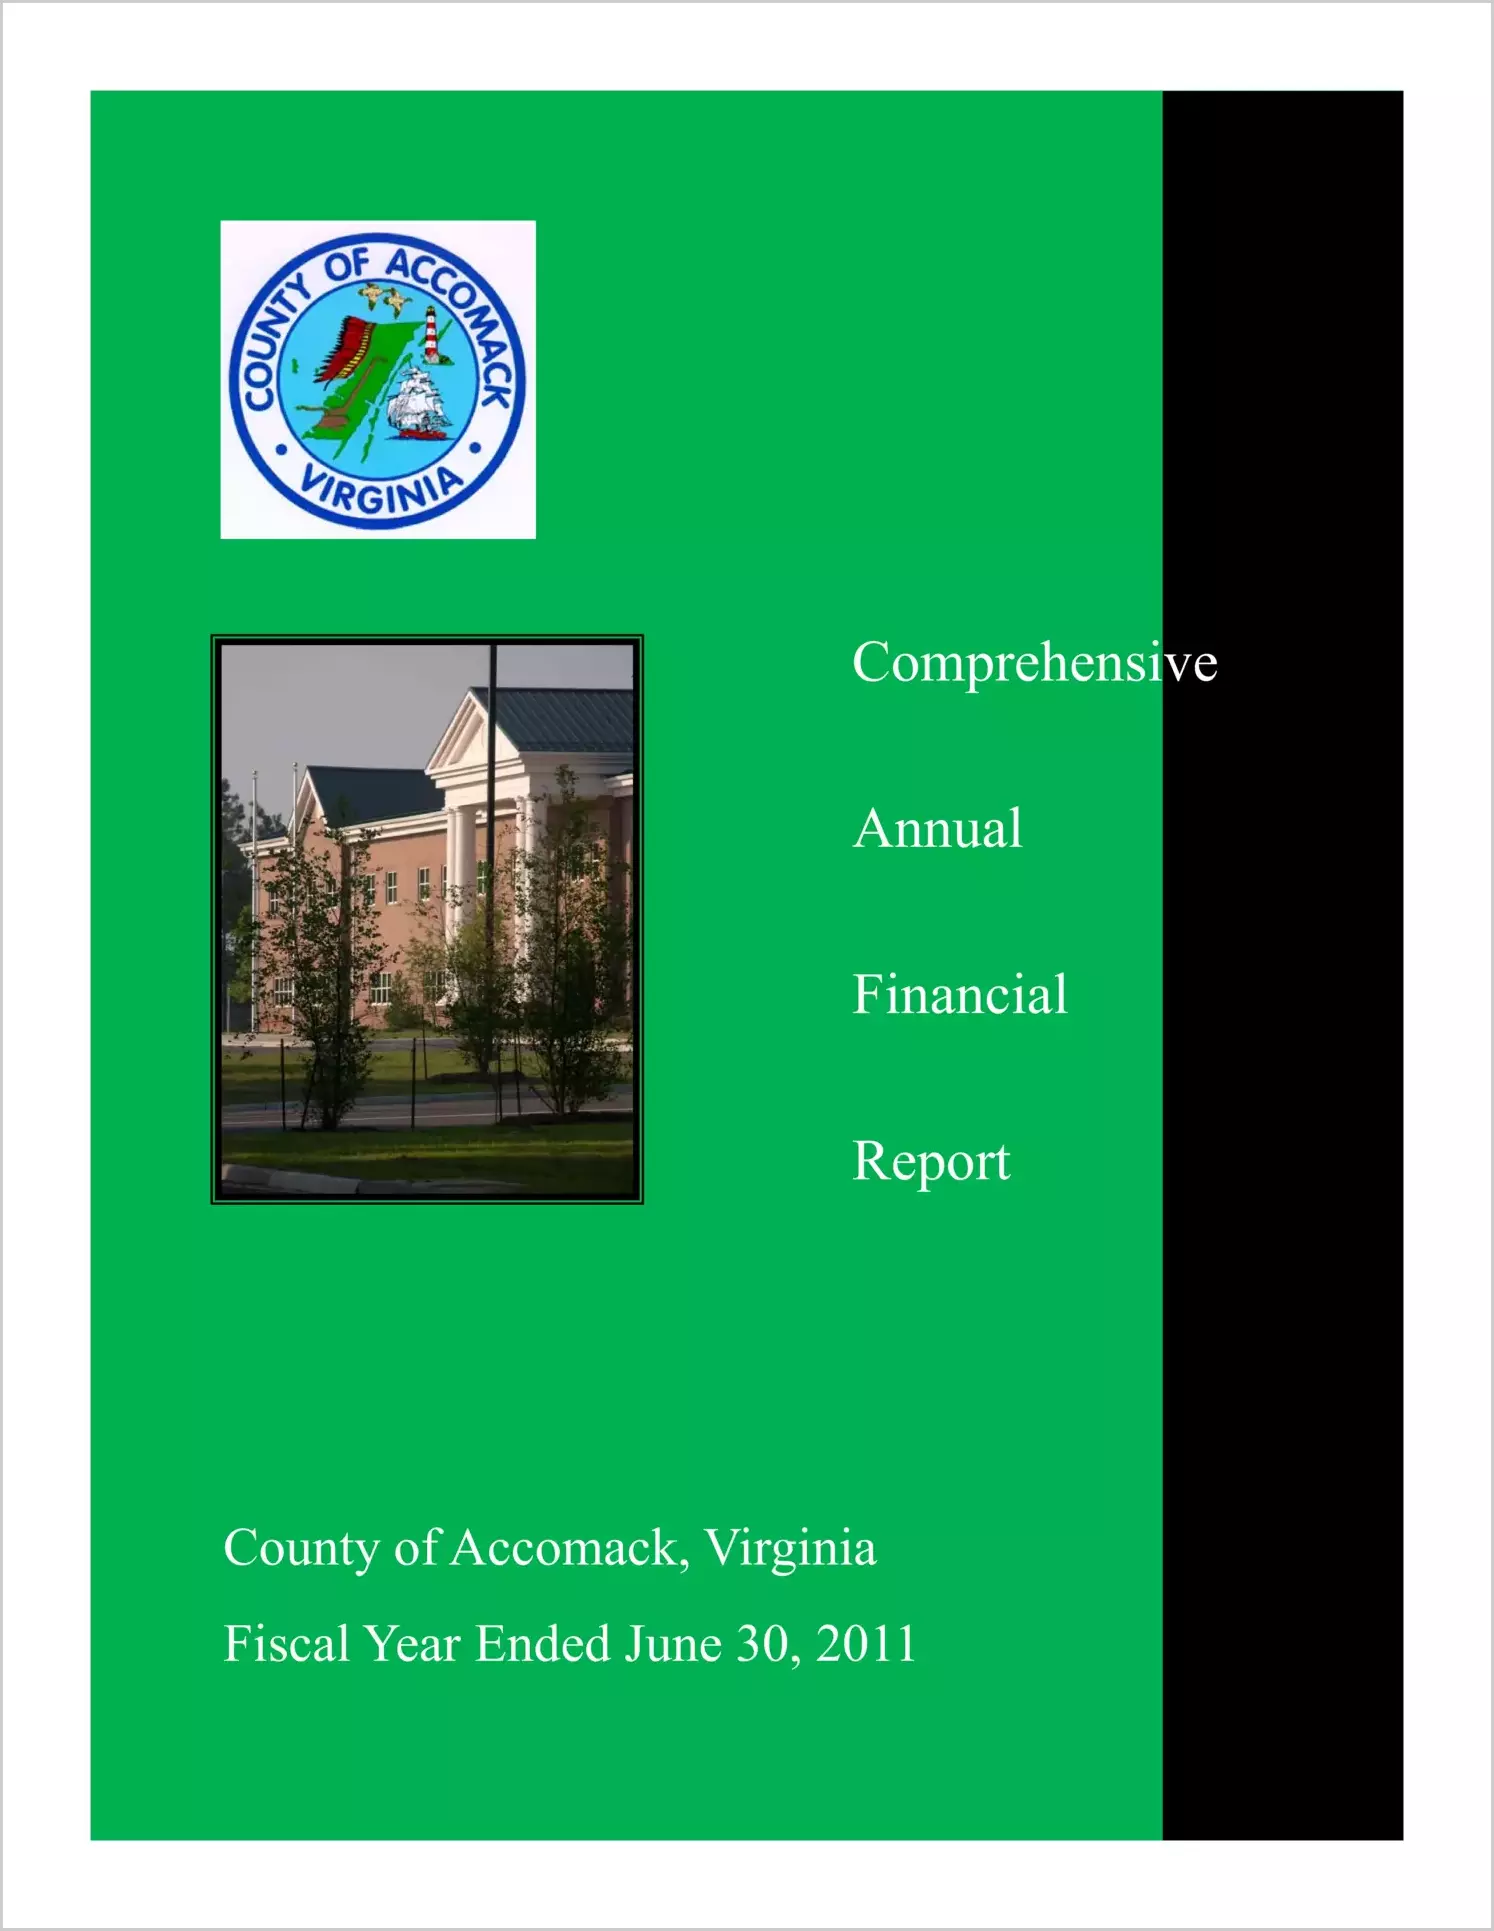 2011 Annual Financial Report for County of Accomack